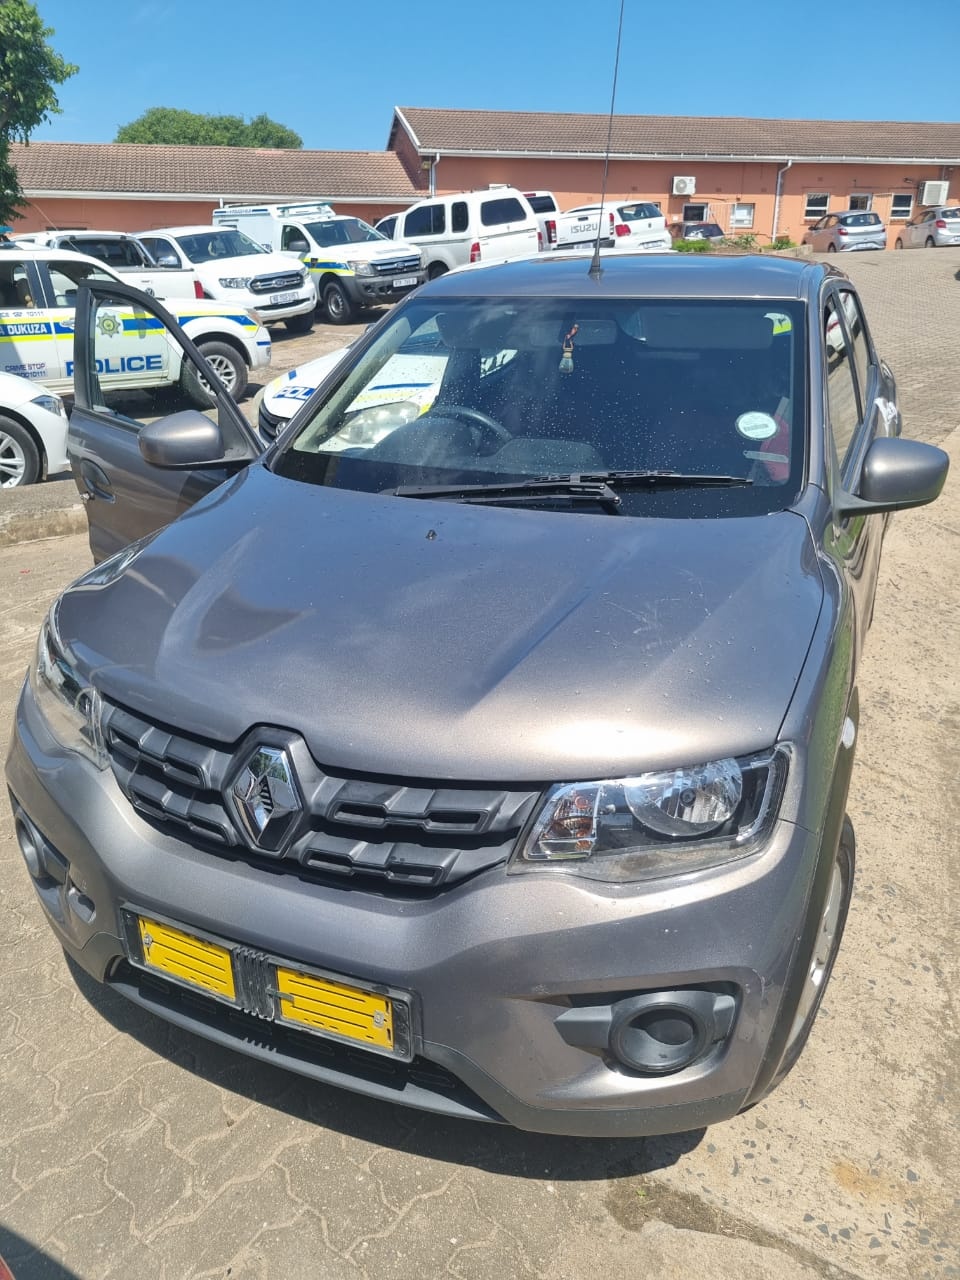 Suspect arrested following recovery of stolen vehicle in Kwadukuza